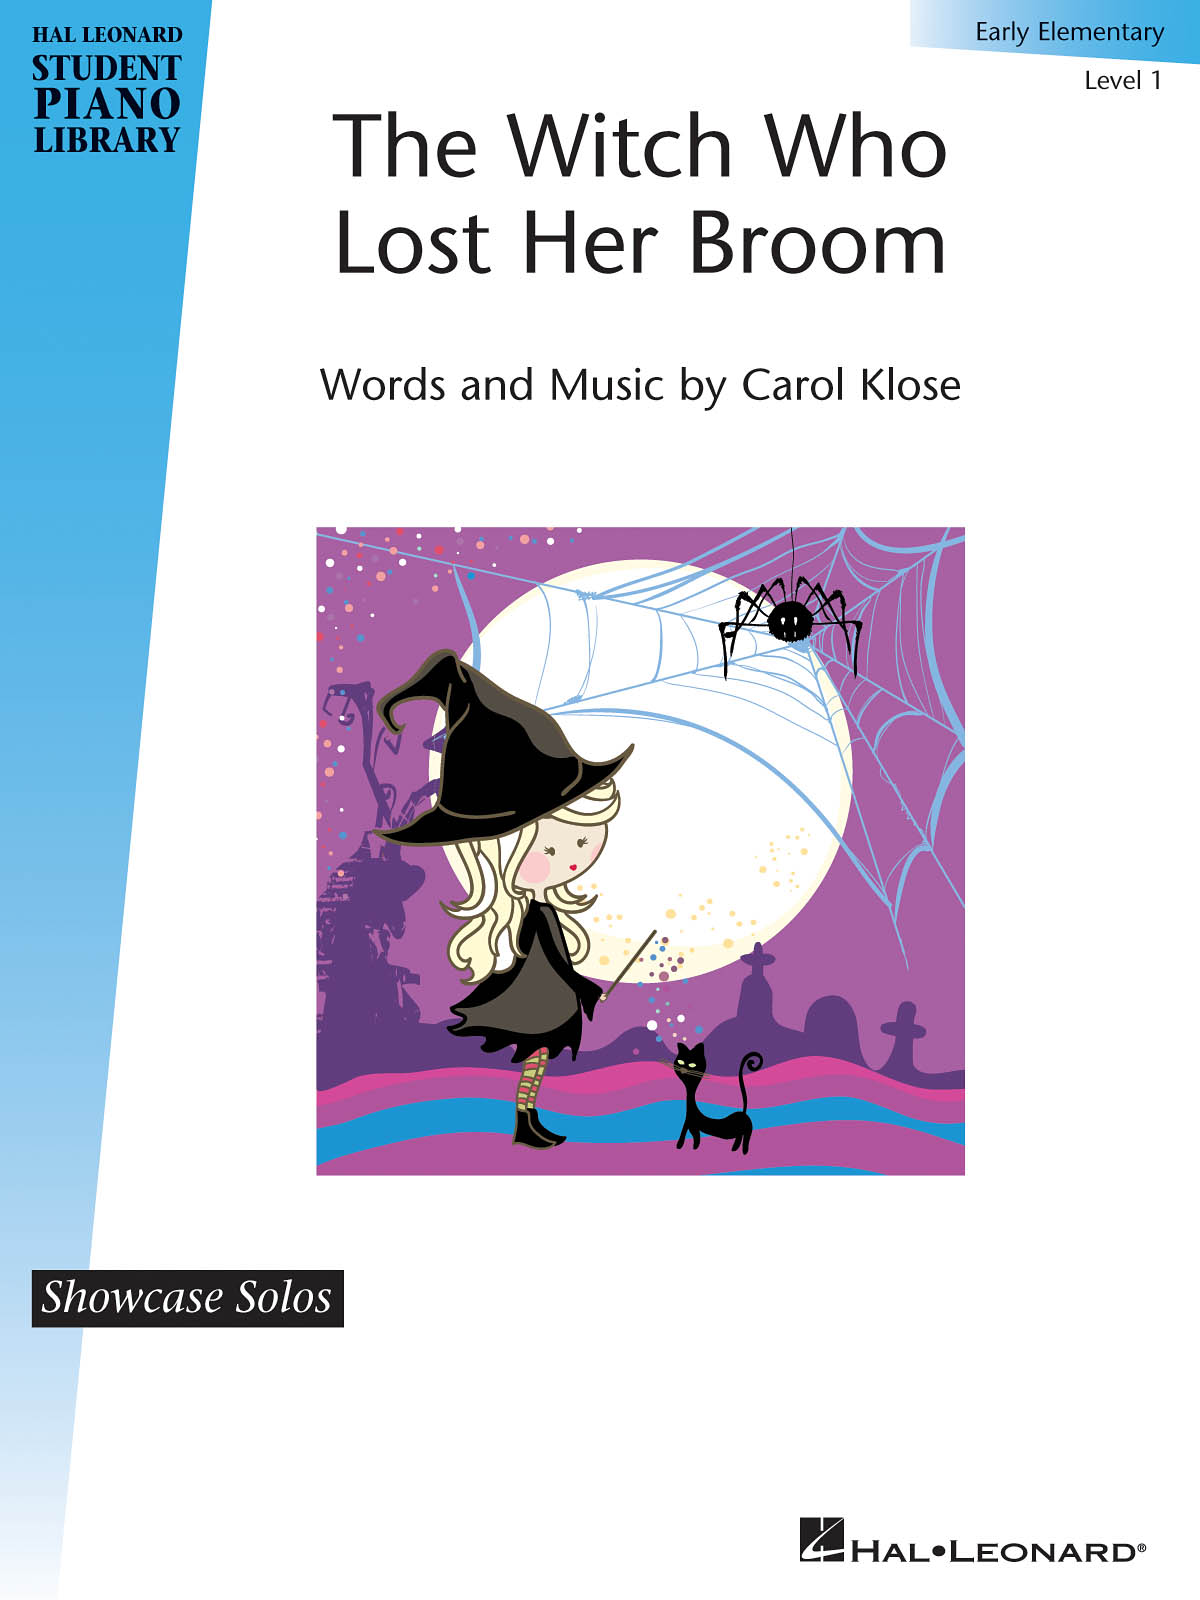 The Witch Who Lost Her Broom(Hal Leonard Student Piano Library Showcase Solos Early Elementary - Lev